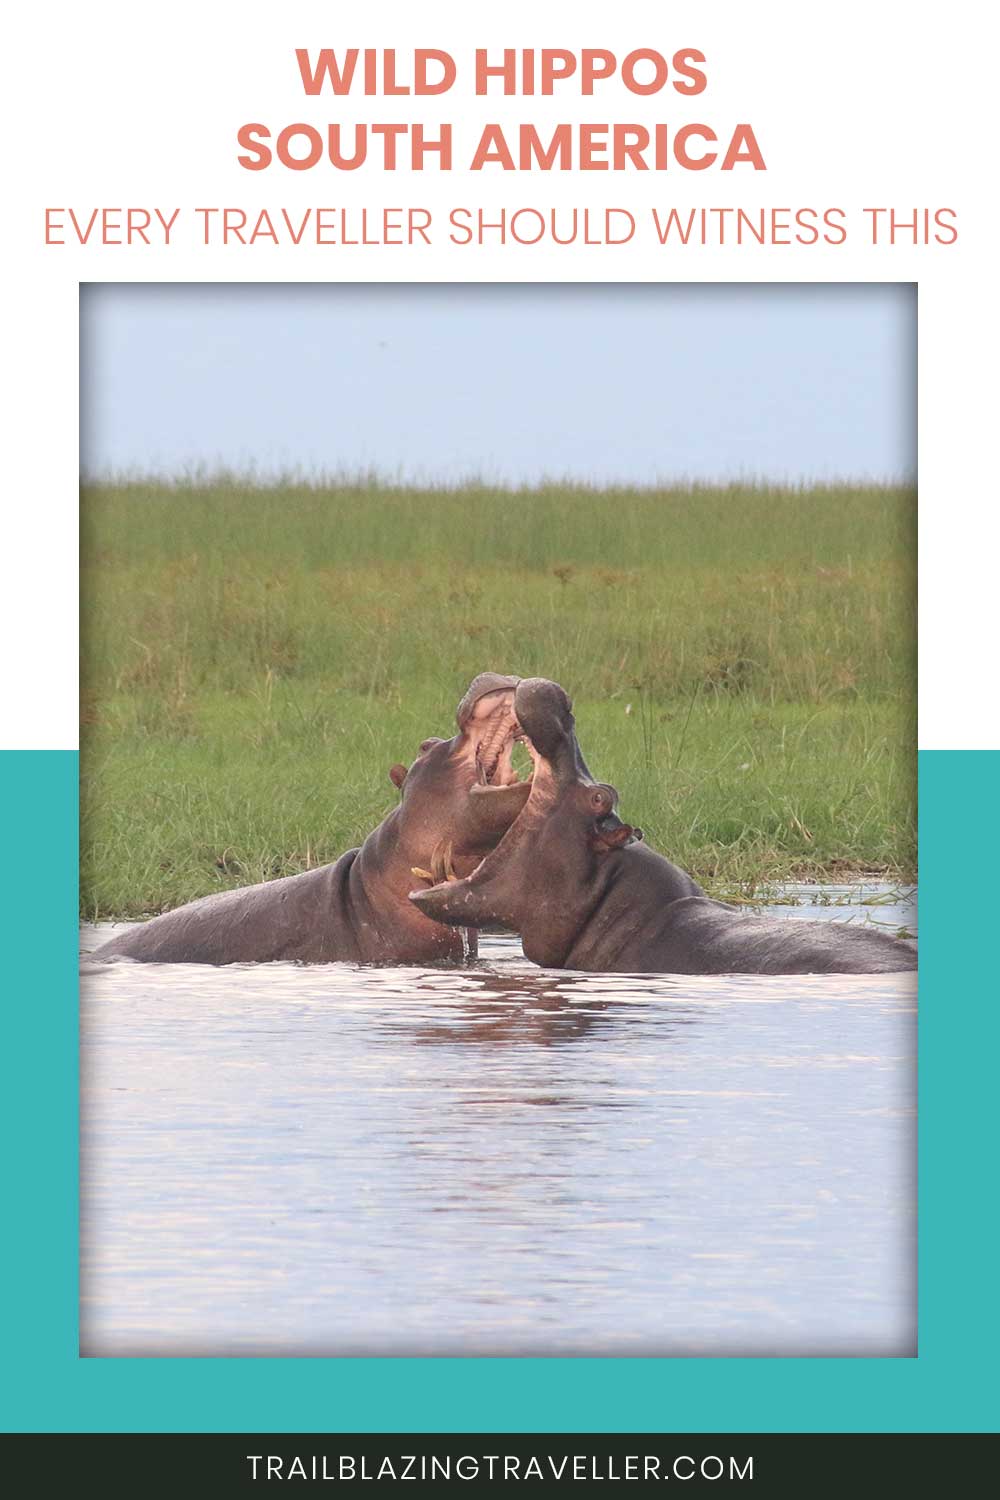 Two hippos in a river - Wild Hippos South America - Every Traveller Should Witness This